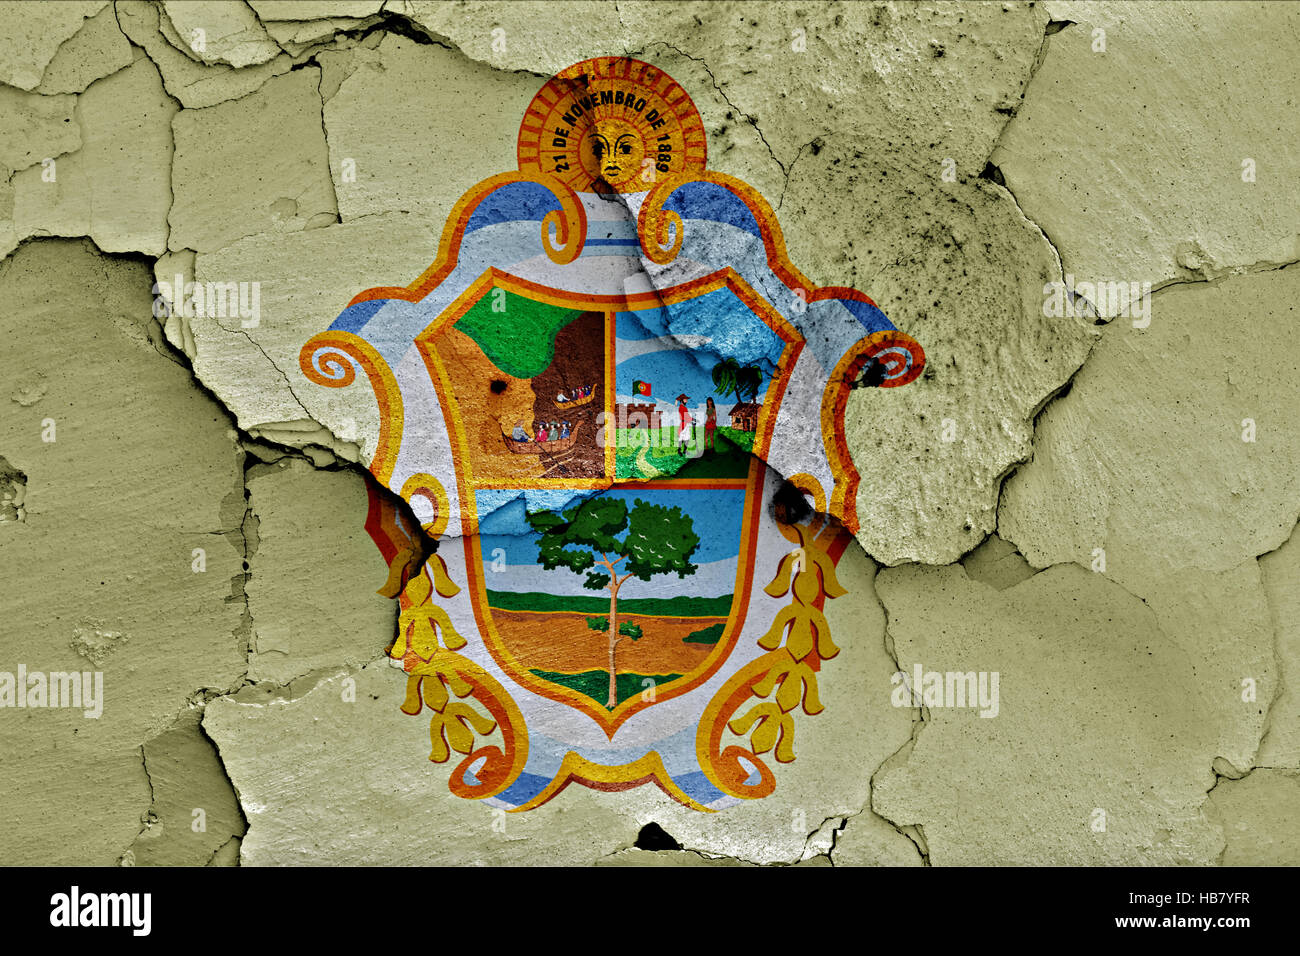 flag of Manaus painted on cracked wall Stock Photo